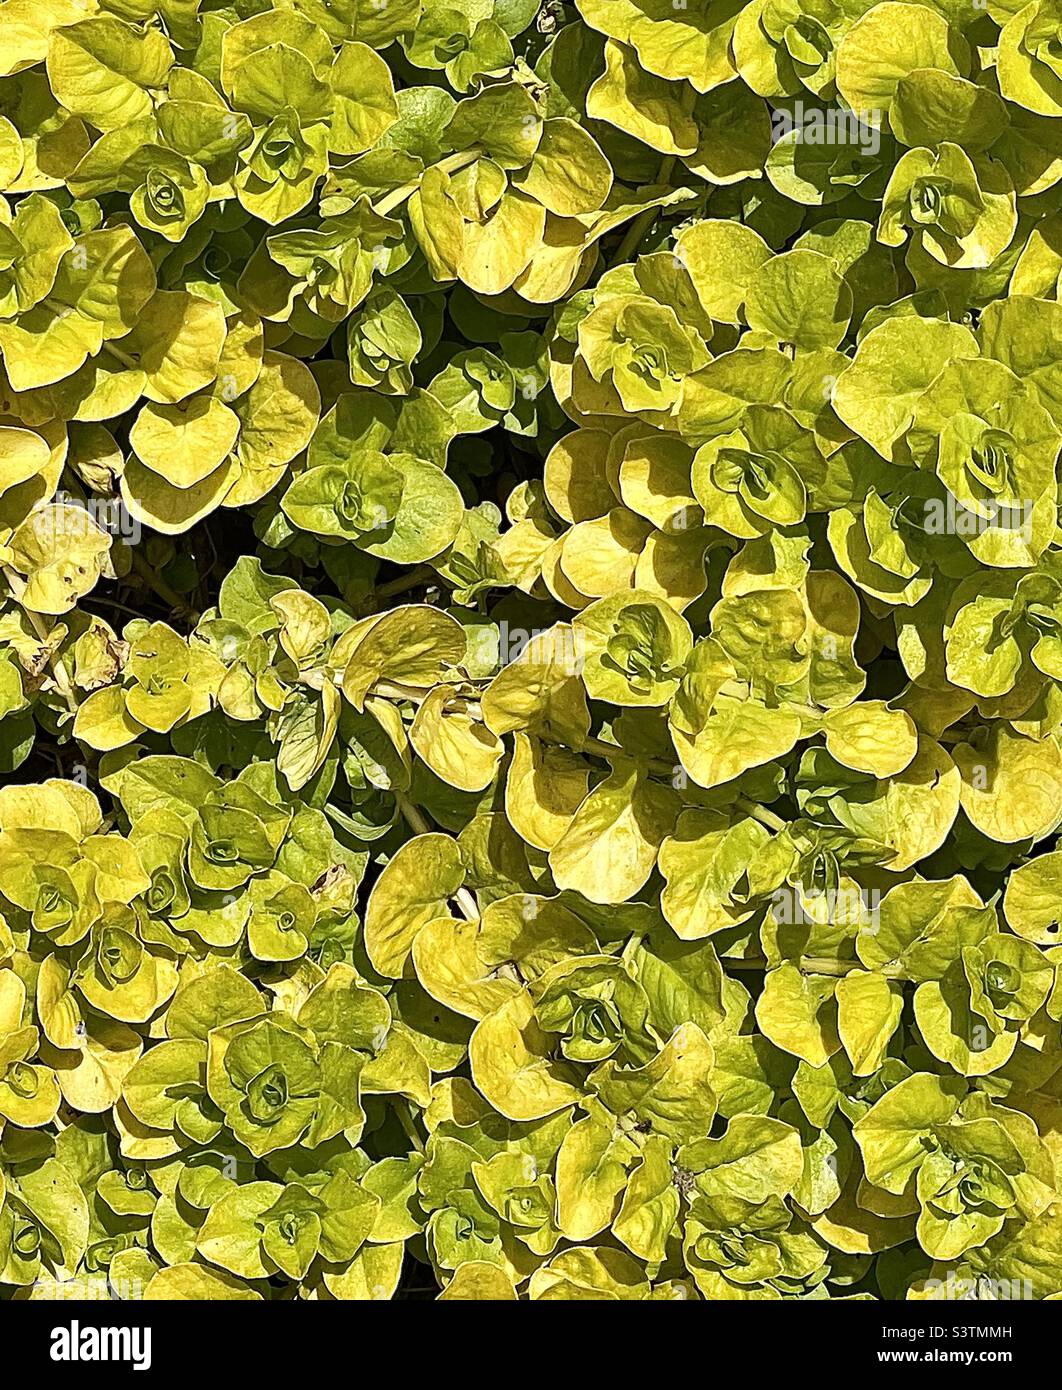 A close view of the ground cover “creeping Jenny” in a backyard garden in Utah, USA. Makes a nice natural abstract. Stock Photo